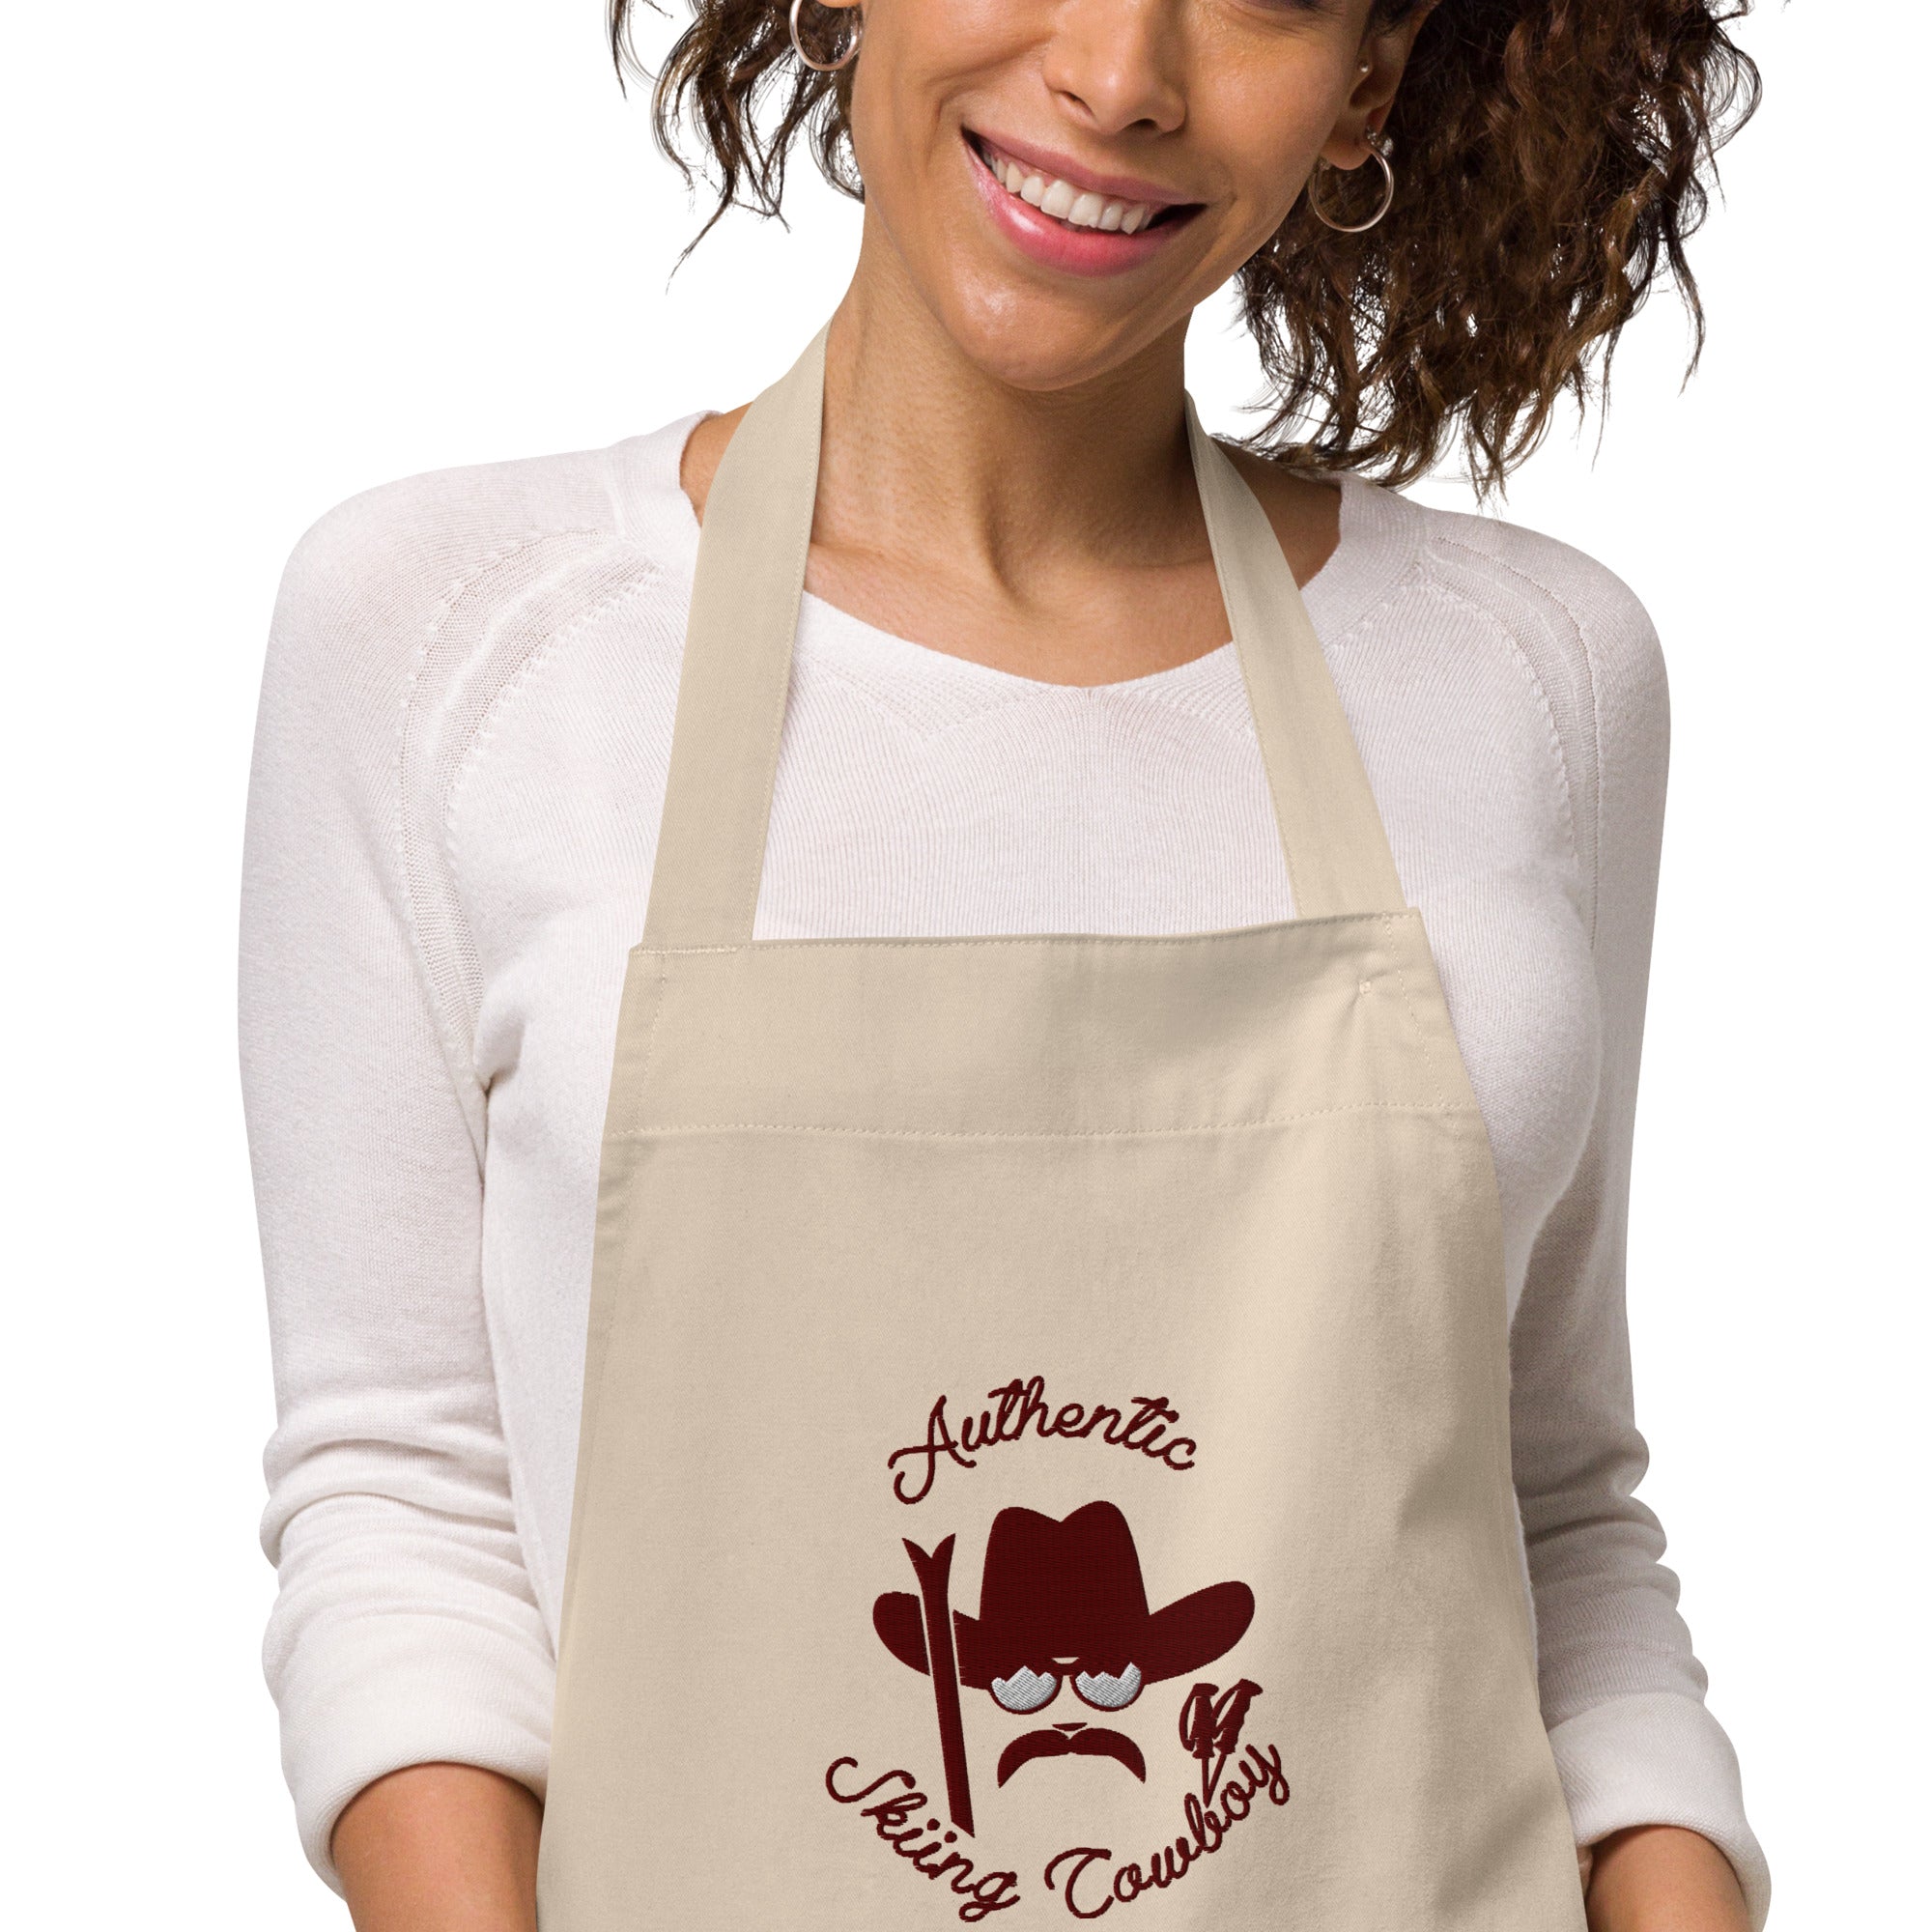 Organic cotton apron Authentic Skiing Cowboy large brown embroidered pattern